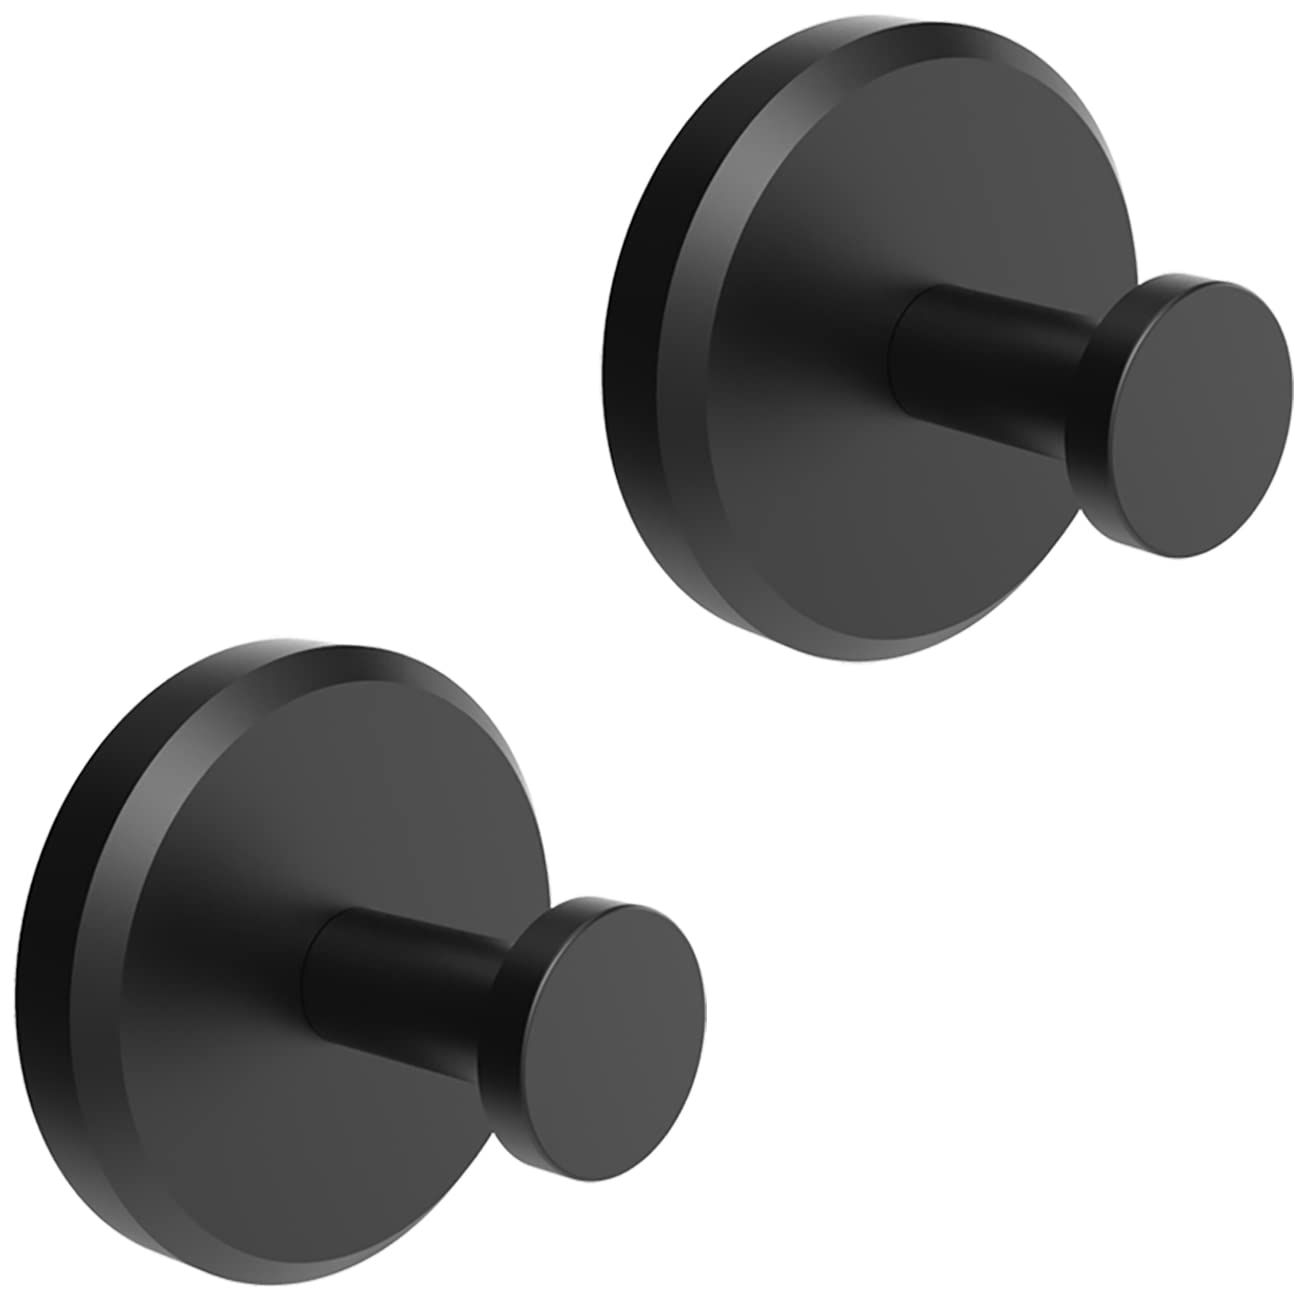 HOME SO Suction Cup Hooks for Shower, Bathroom, Kitchen, Glass Door, Mirror, Tile – Loofah, Towel, Coat, Bath Robe Hook Holder for Hanging up to 15 lbs – Waterproof, Dark, Matte Black (2-Pack) | Amazon (US)